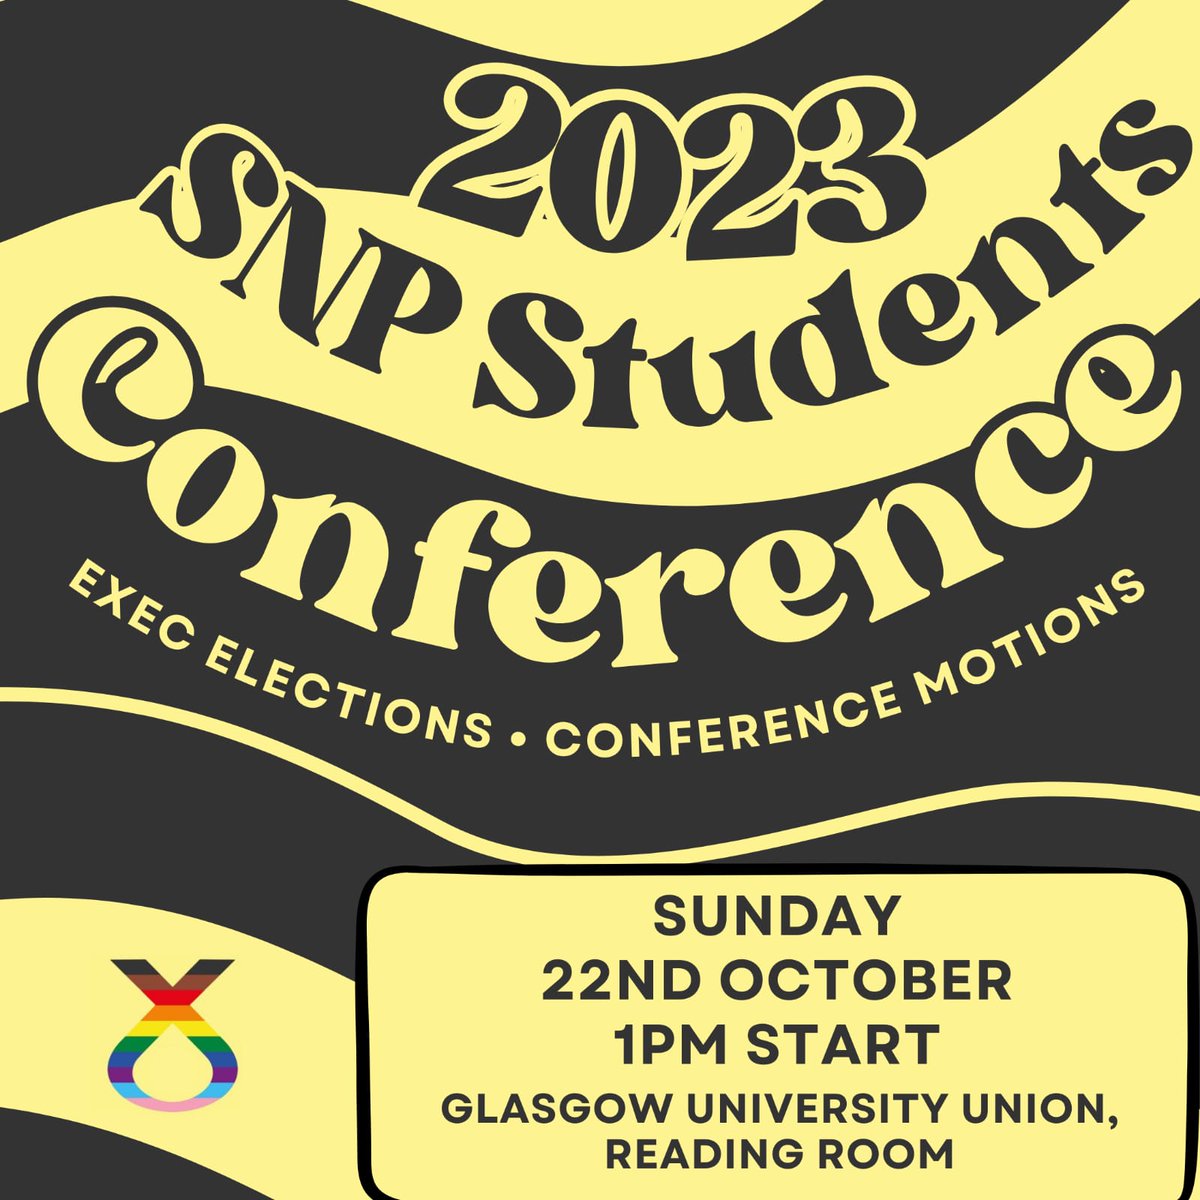 Looking forward to seeing you all at our Annual Conference tomorrow afternoon in the Glasgow University Union Reading Room, where we're delighted to be joined by the fantastic @kirstenoswald MP. Doors open from 12:45, please message us if you have any questions!